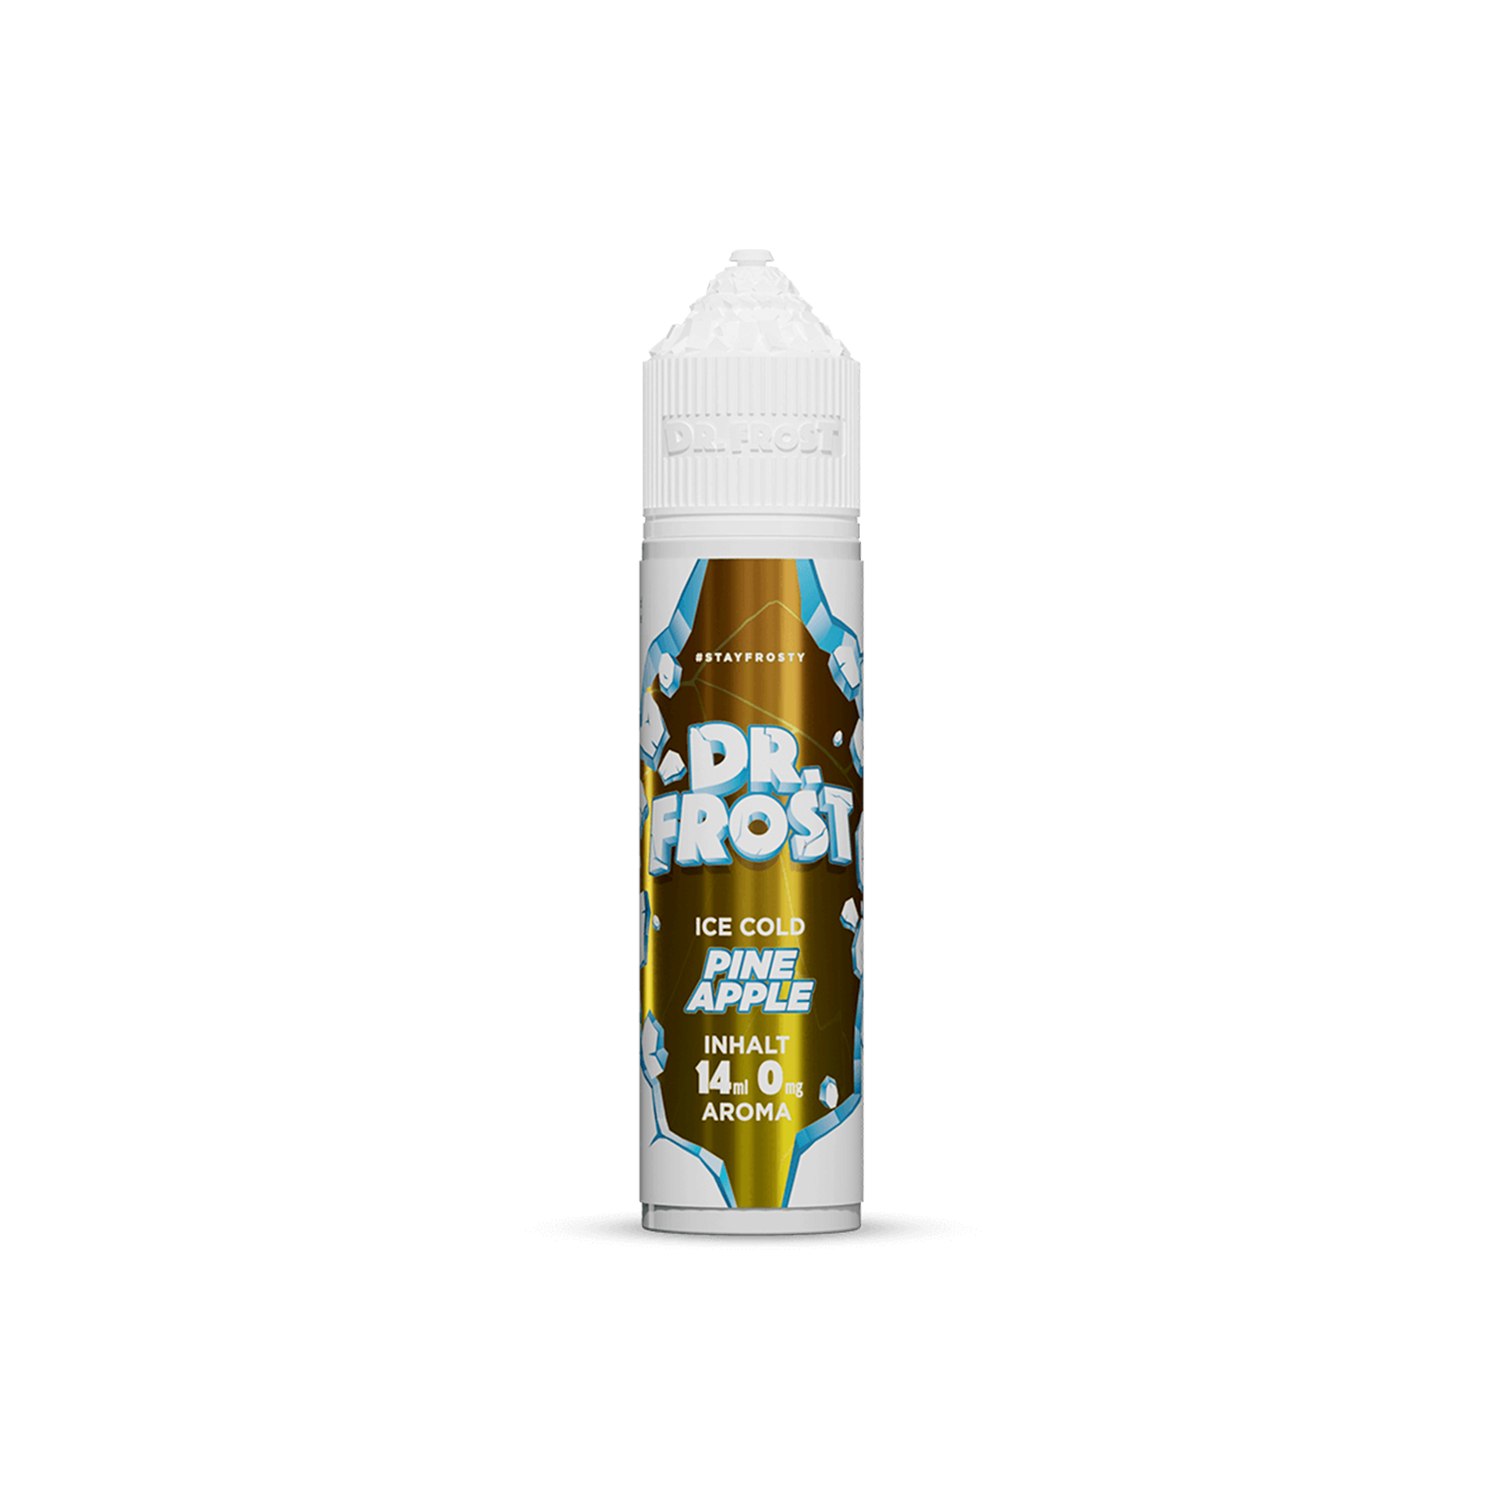 Dr. Frost - Ice Cold - Pineapple 14 ml Aroma 